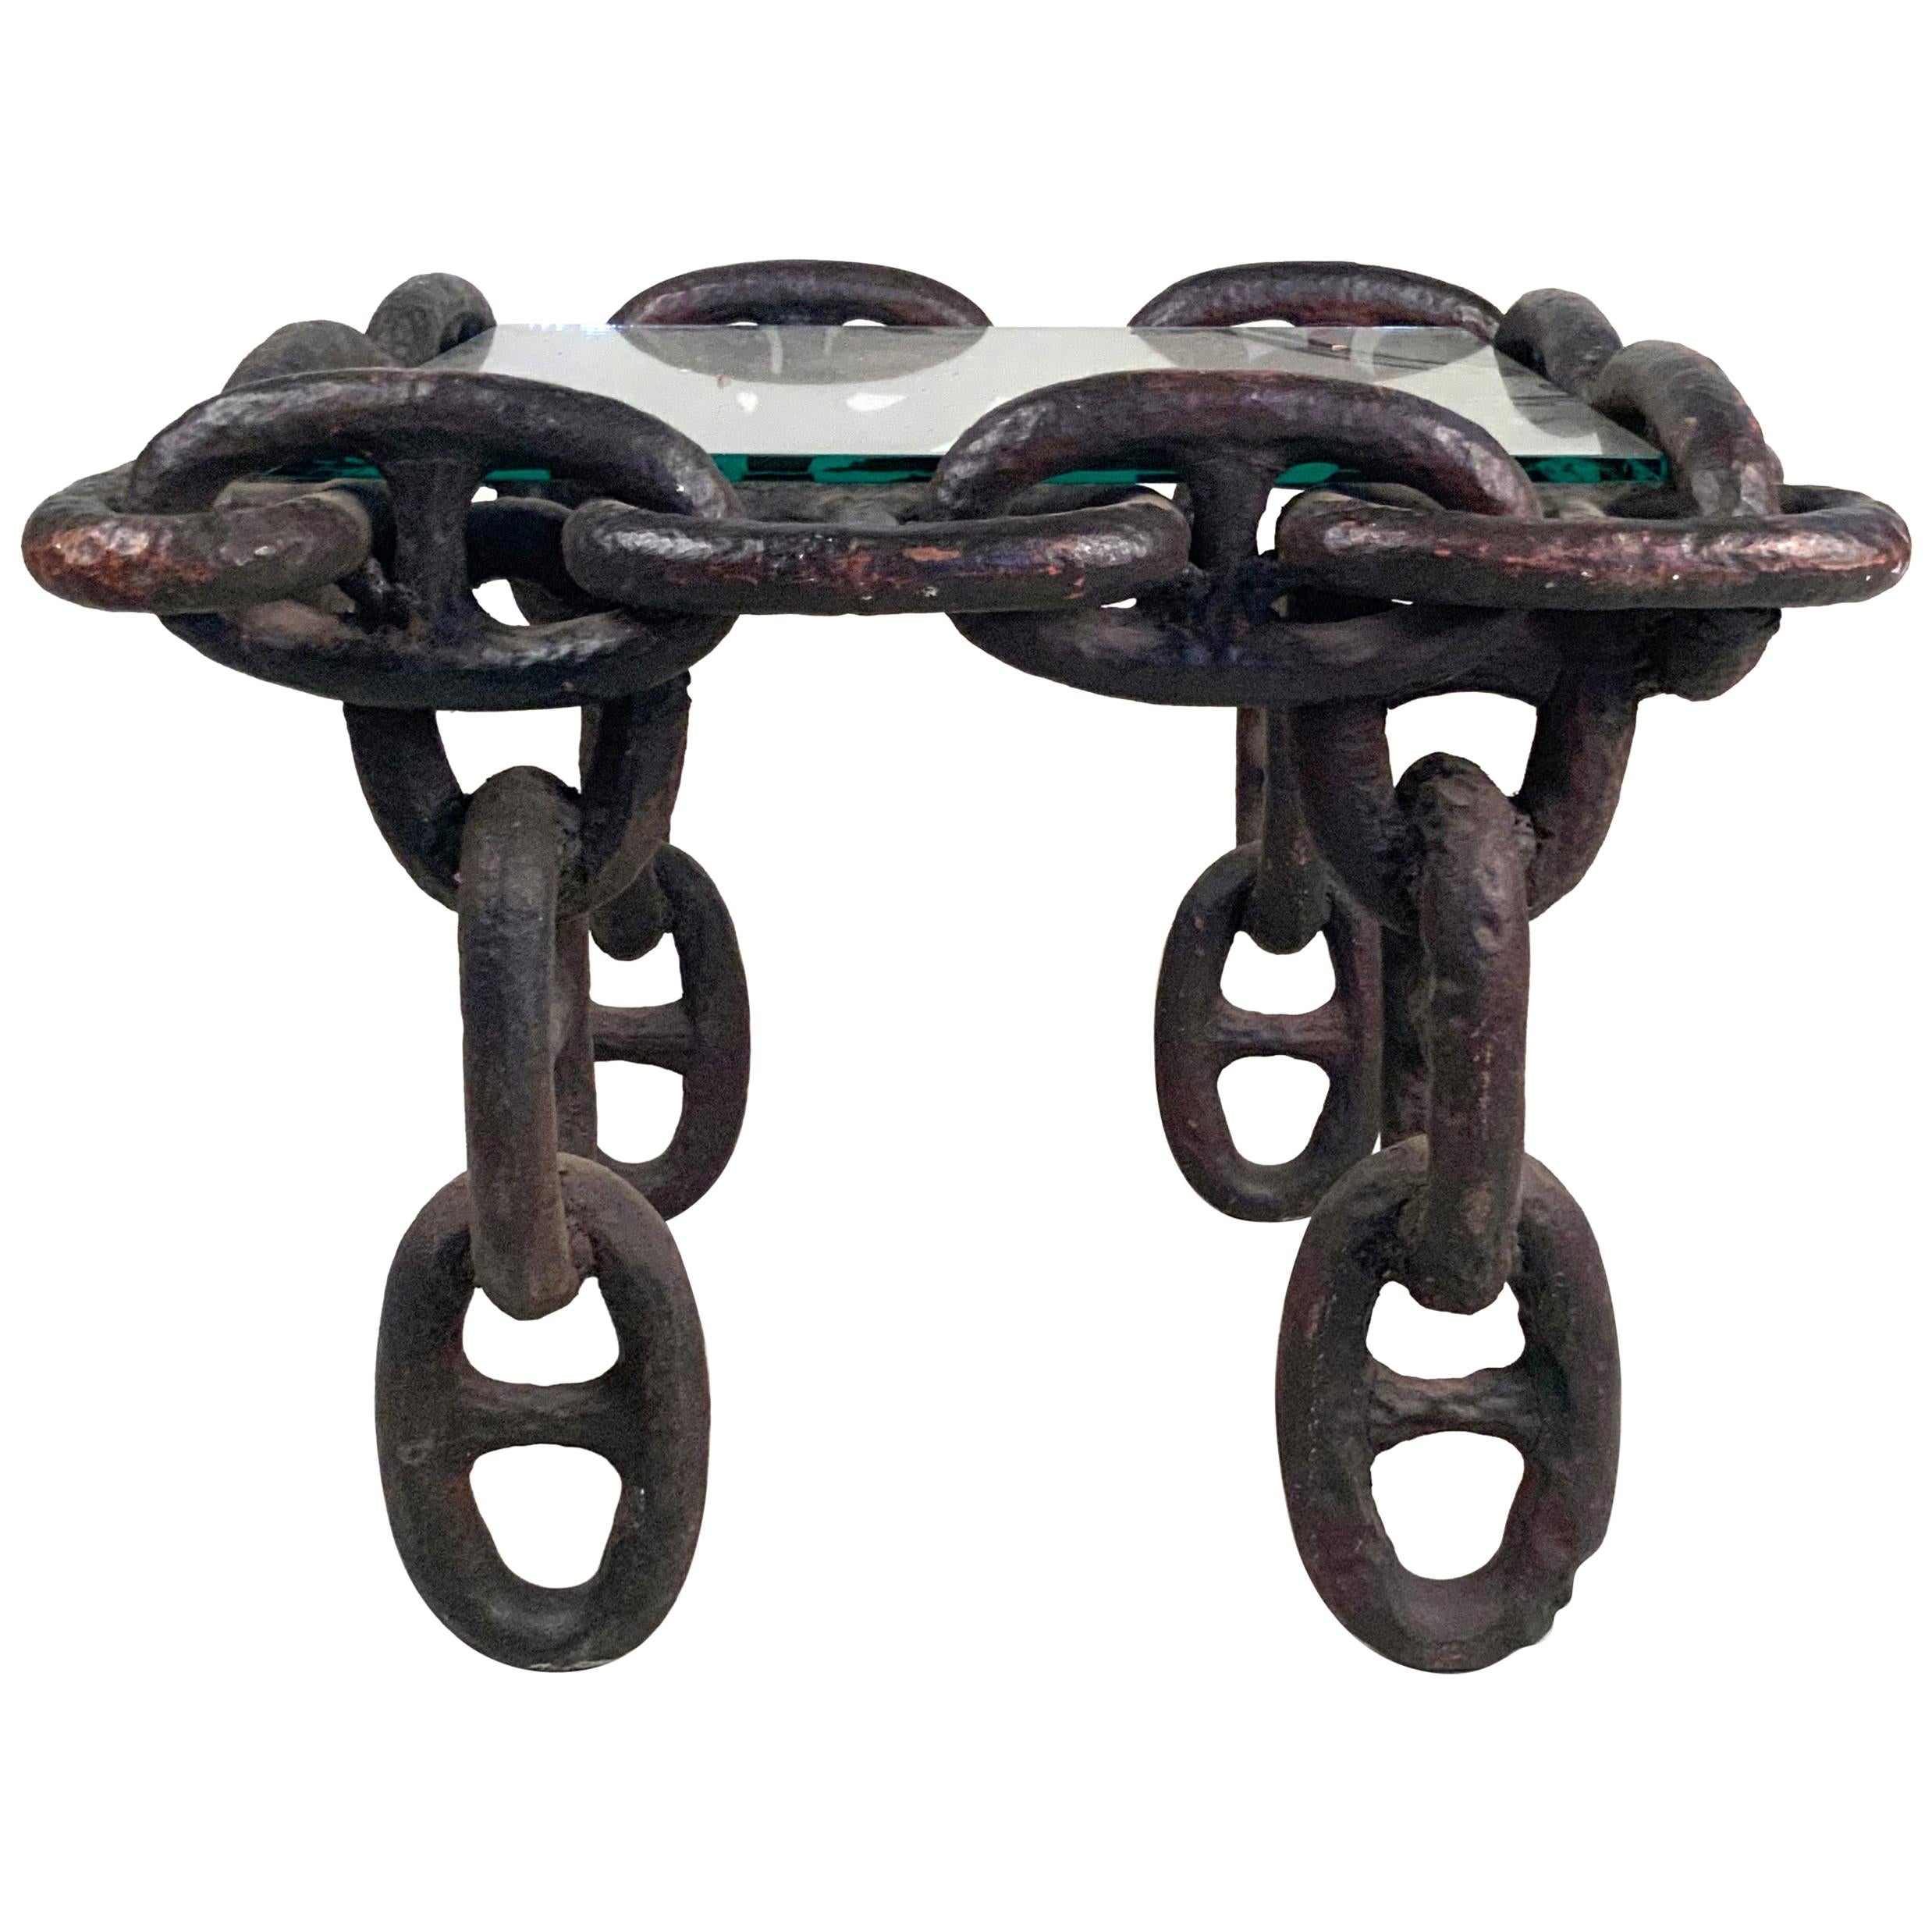 https://a.1stdibscdn.com/antique-iron-chain-link-coffee-table-for-sale/1121189/f_223255321612014252055/22325532_master.jpg